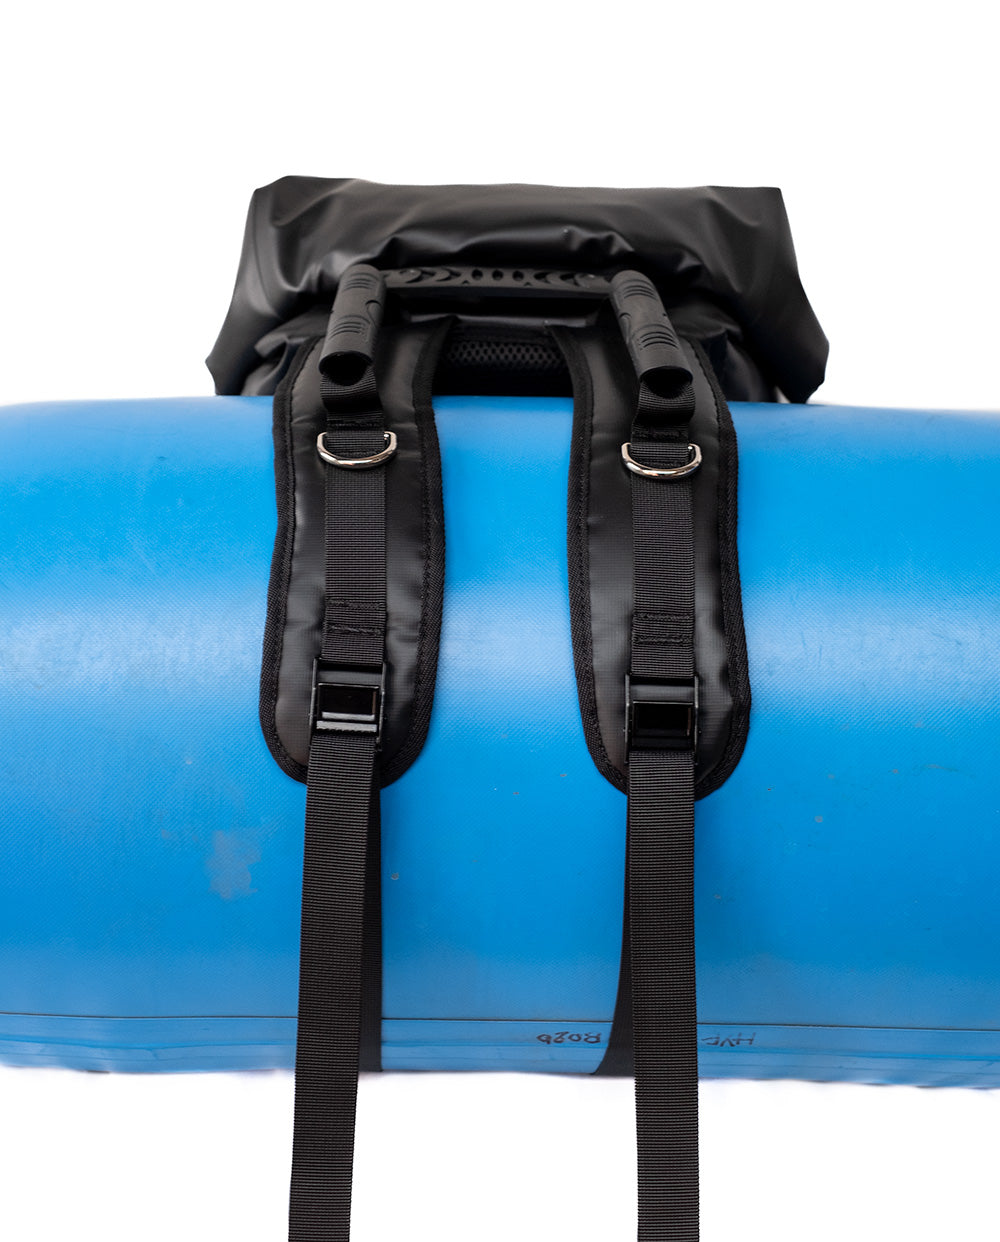 Dry thwart bag for whitewater rafting from river station gear. 